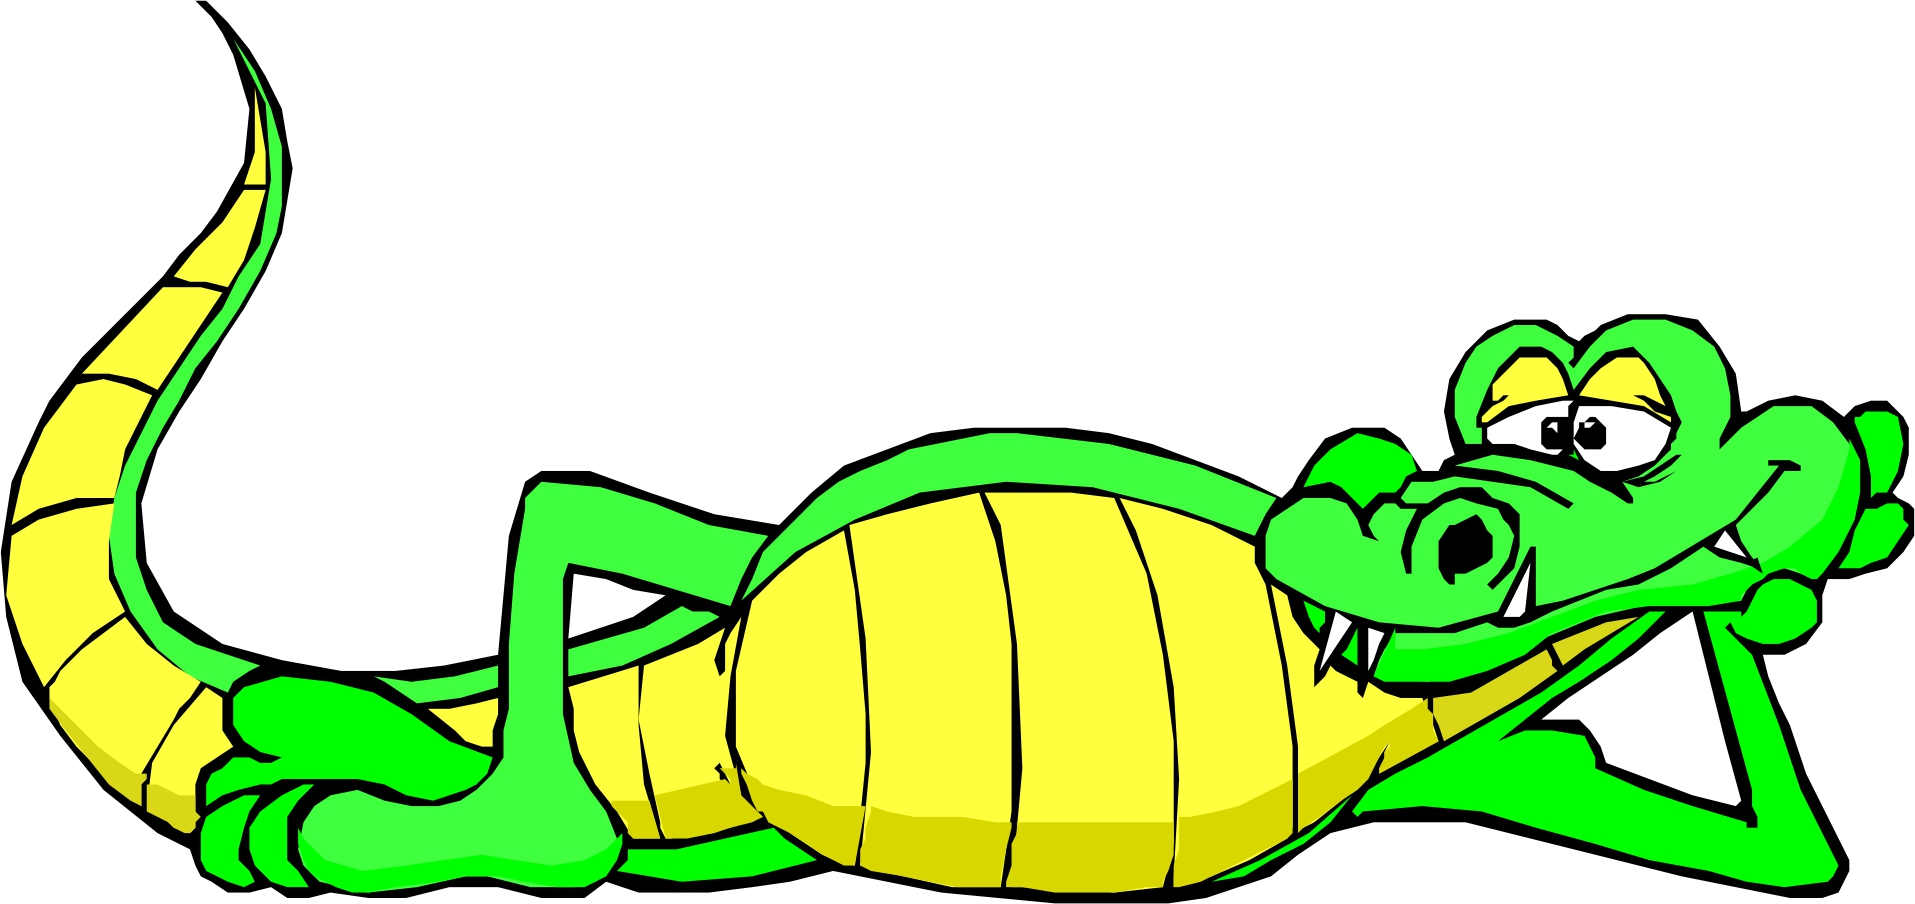 Funny Alligator Crocodile Pictures 5 Png Image Clipart